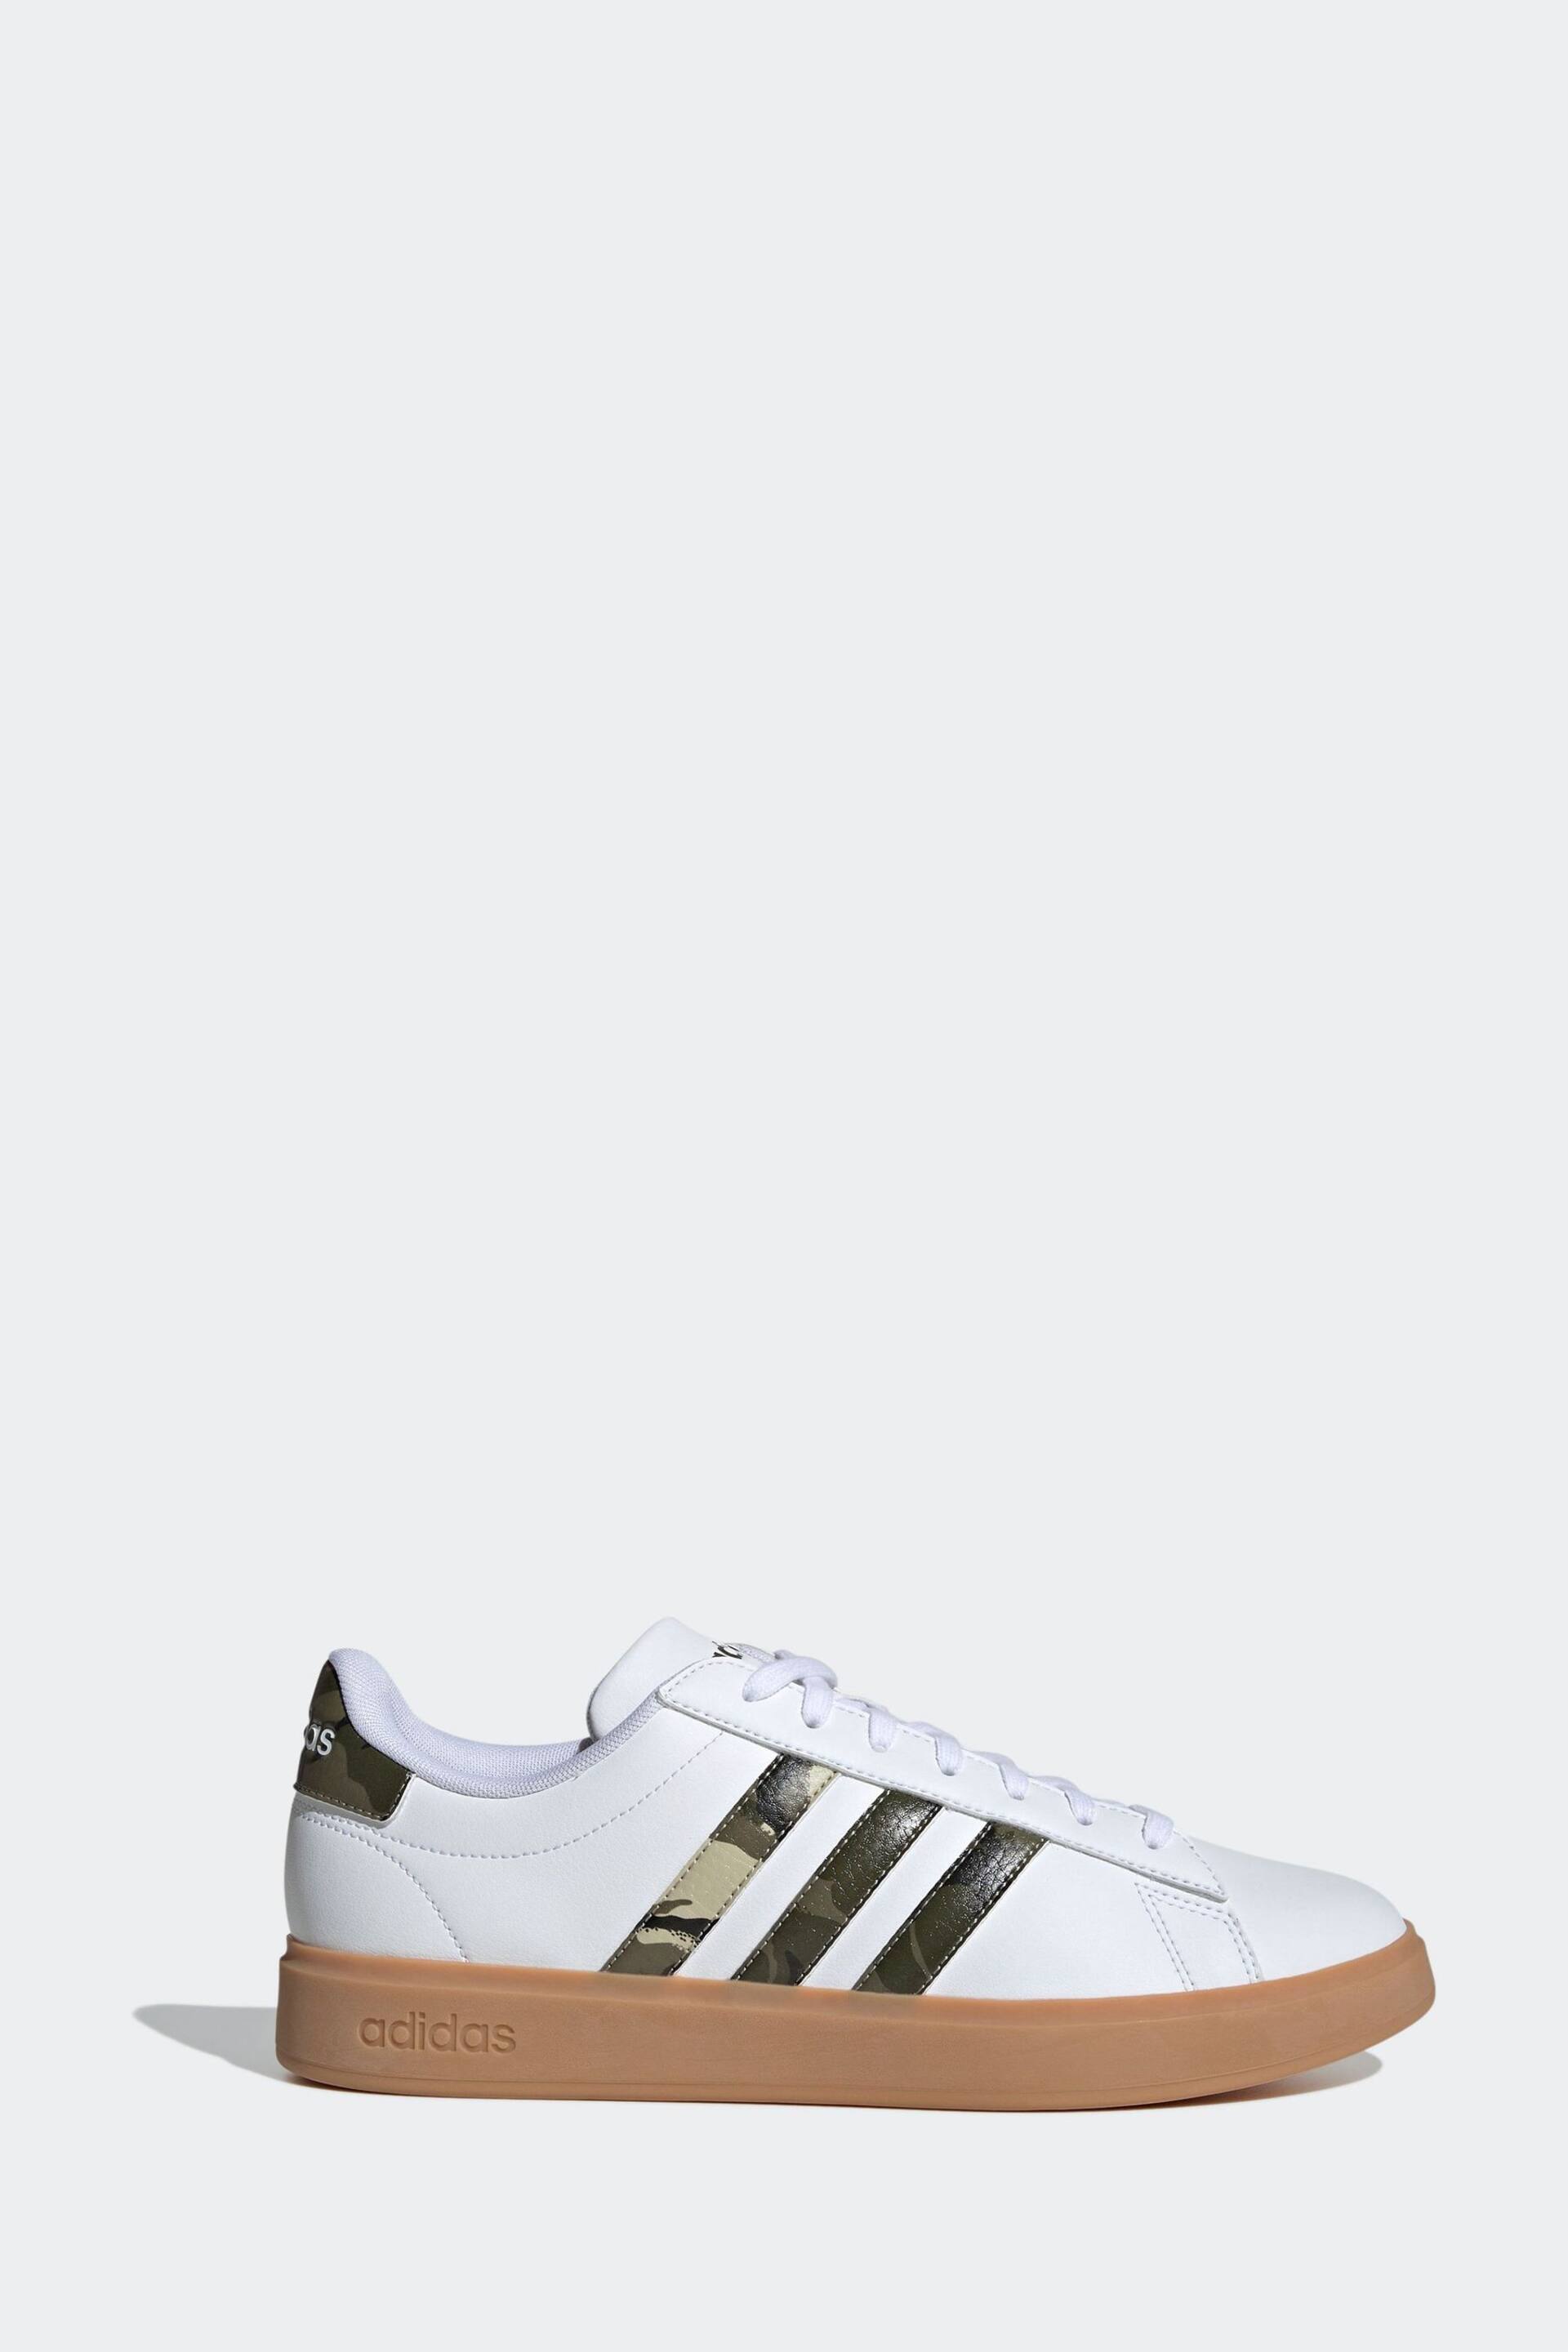 adidas Off White Sportswear Grand Court 2.0 Trainers - Image 1 of 9